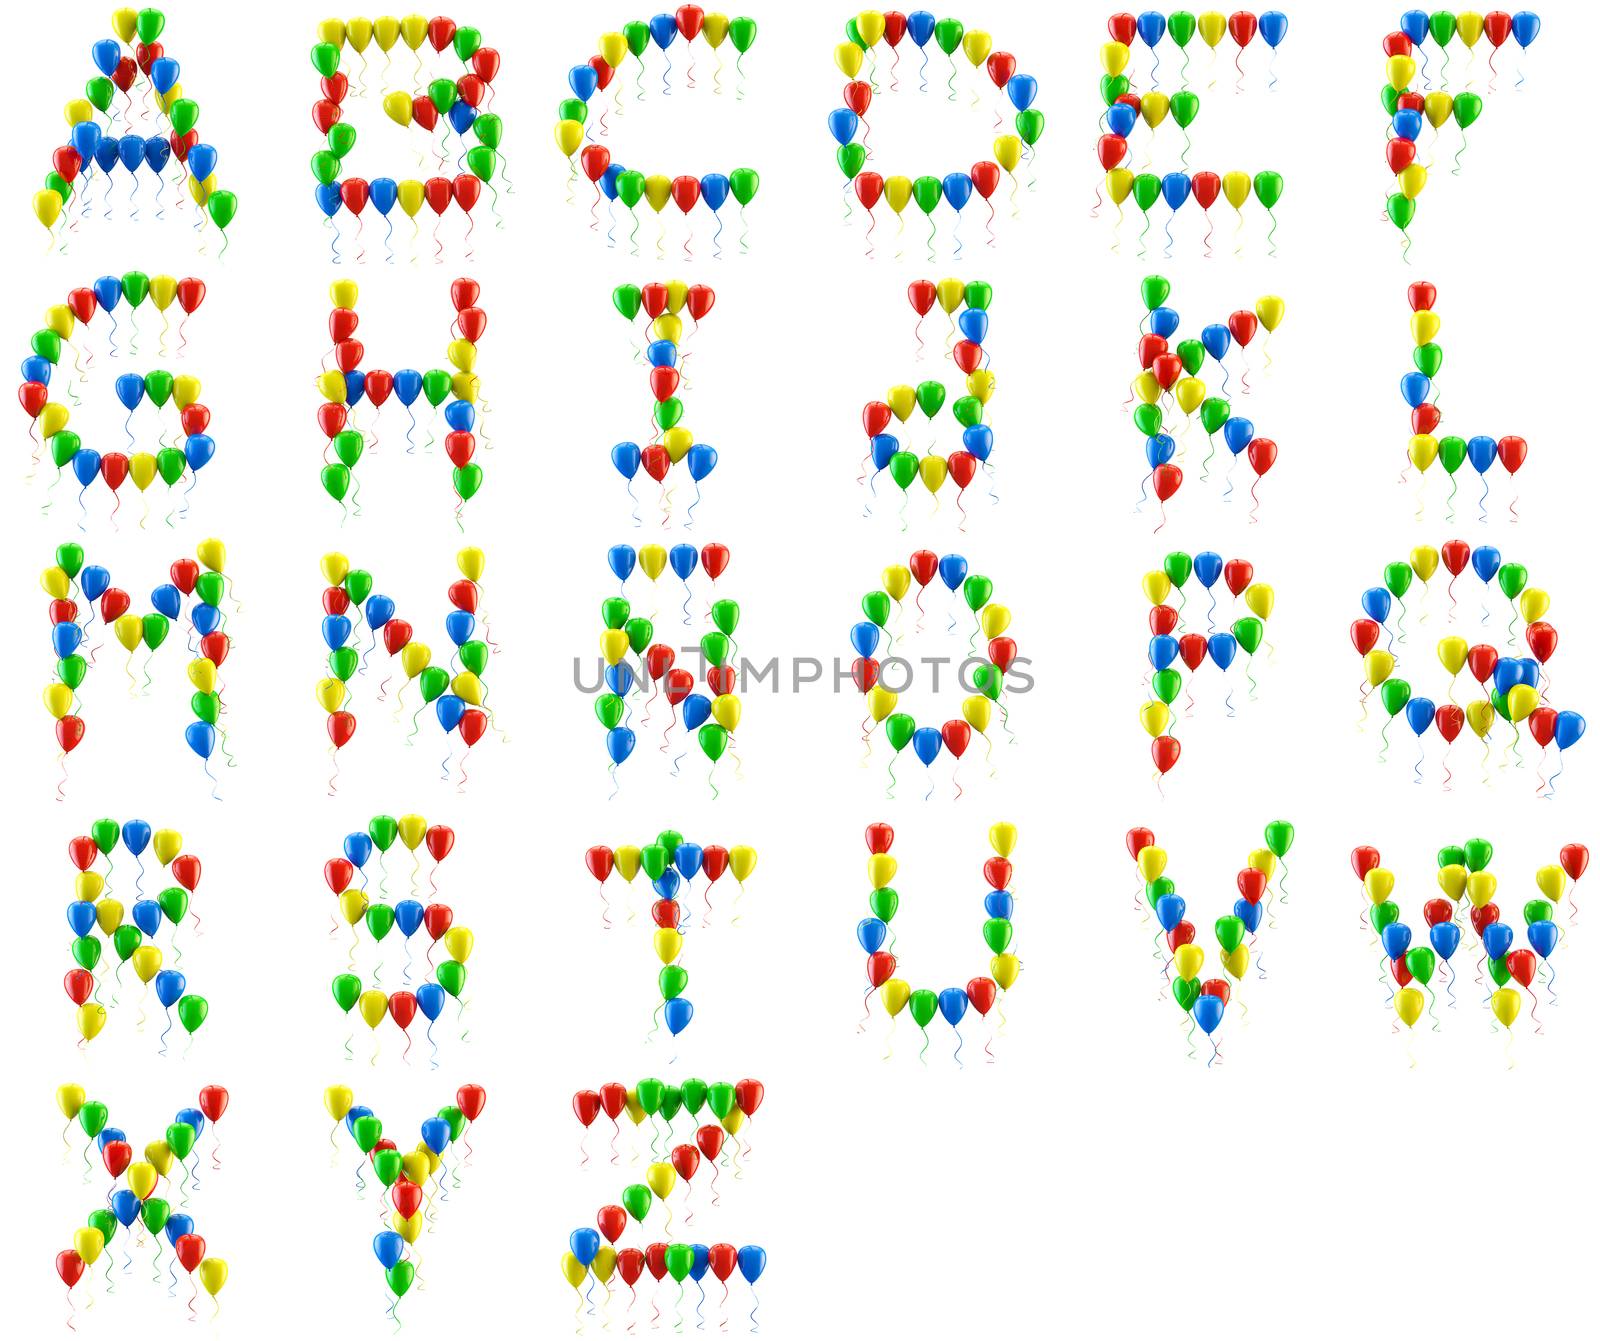 3D rendering Colorful balloons alphabet isolated over white. by carloscastilla